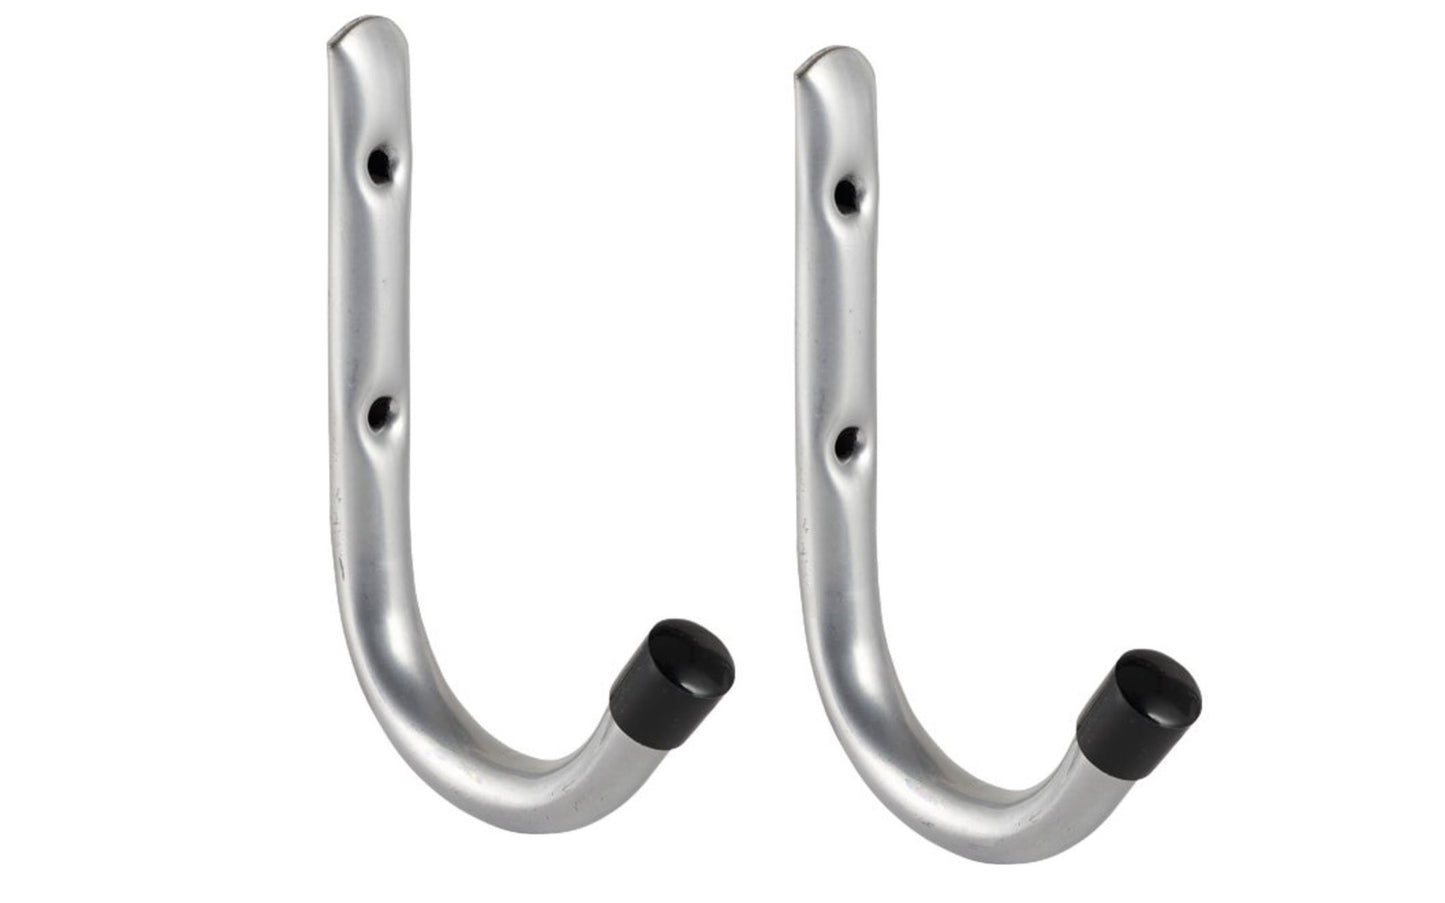 Storage Hanger Hooks. Rust-resistant finish for indoor/outdoor use. Great for power cords, hanging hoses, etc. Mounting hardware included. 009326208435